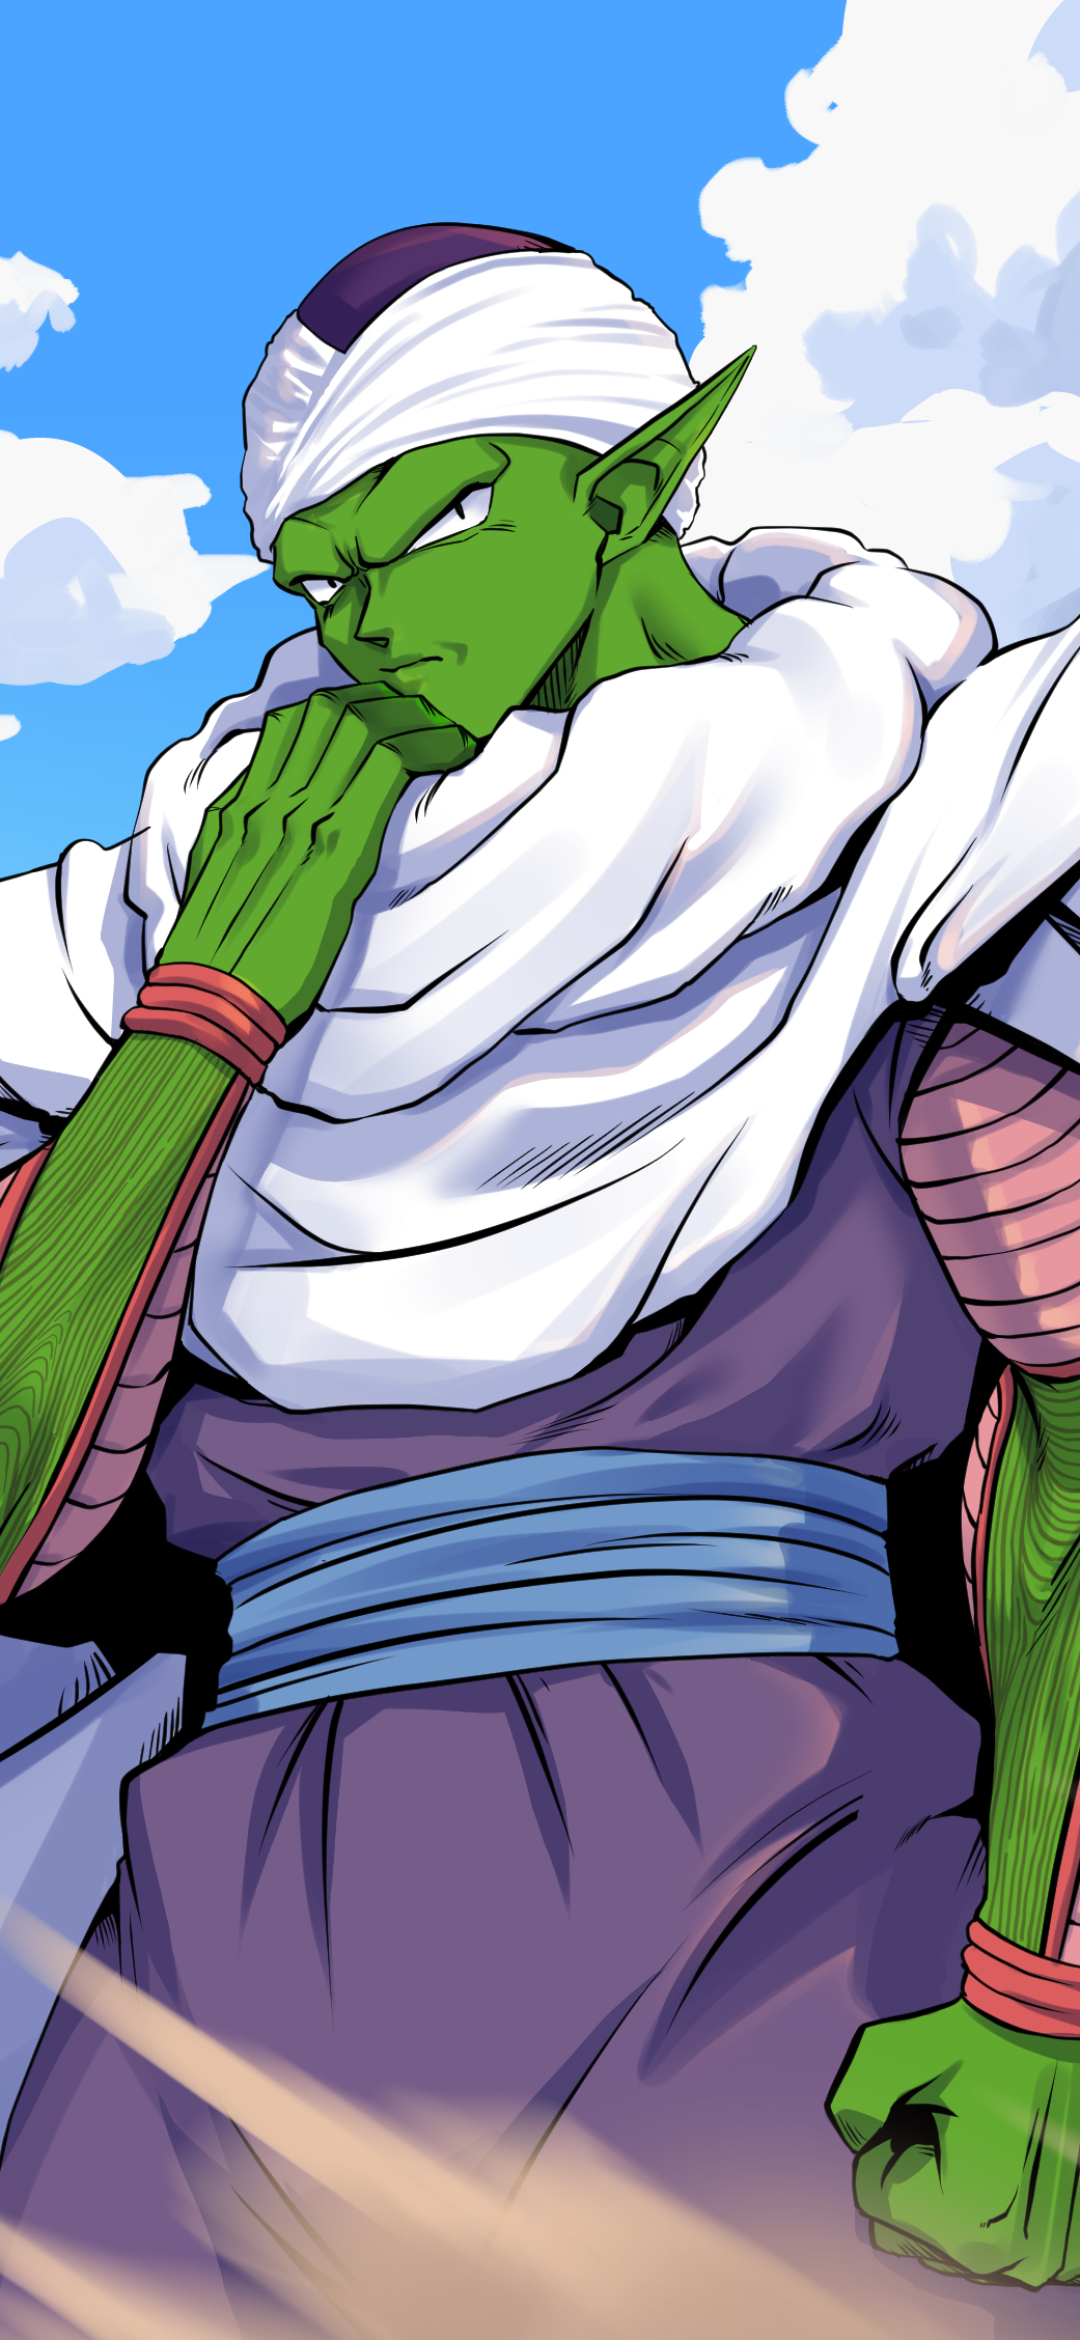 Piccolo wallpaper by mookiepng - Download on ZEDGE™ | 9c11